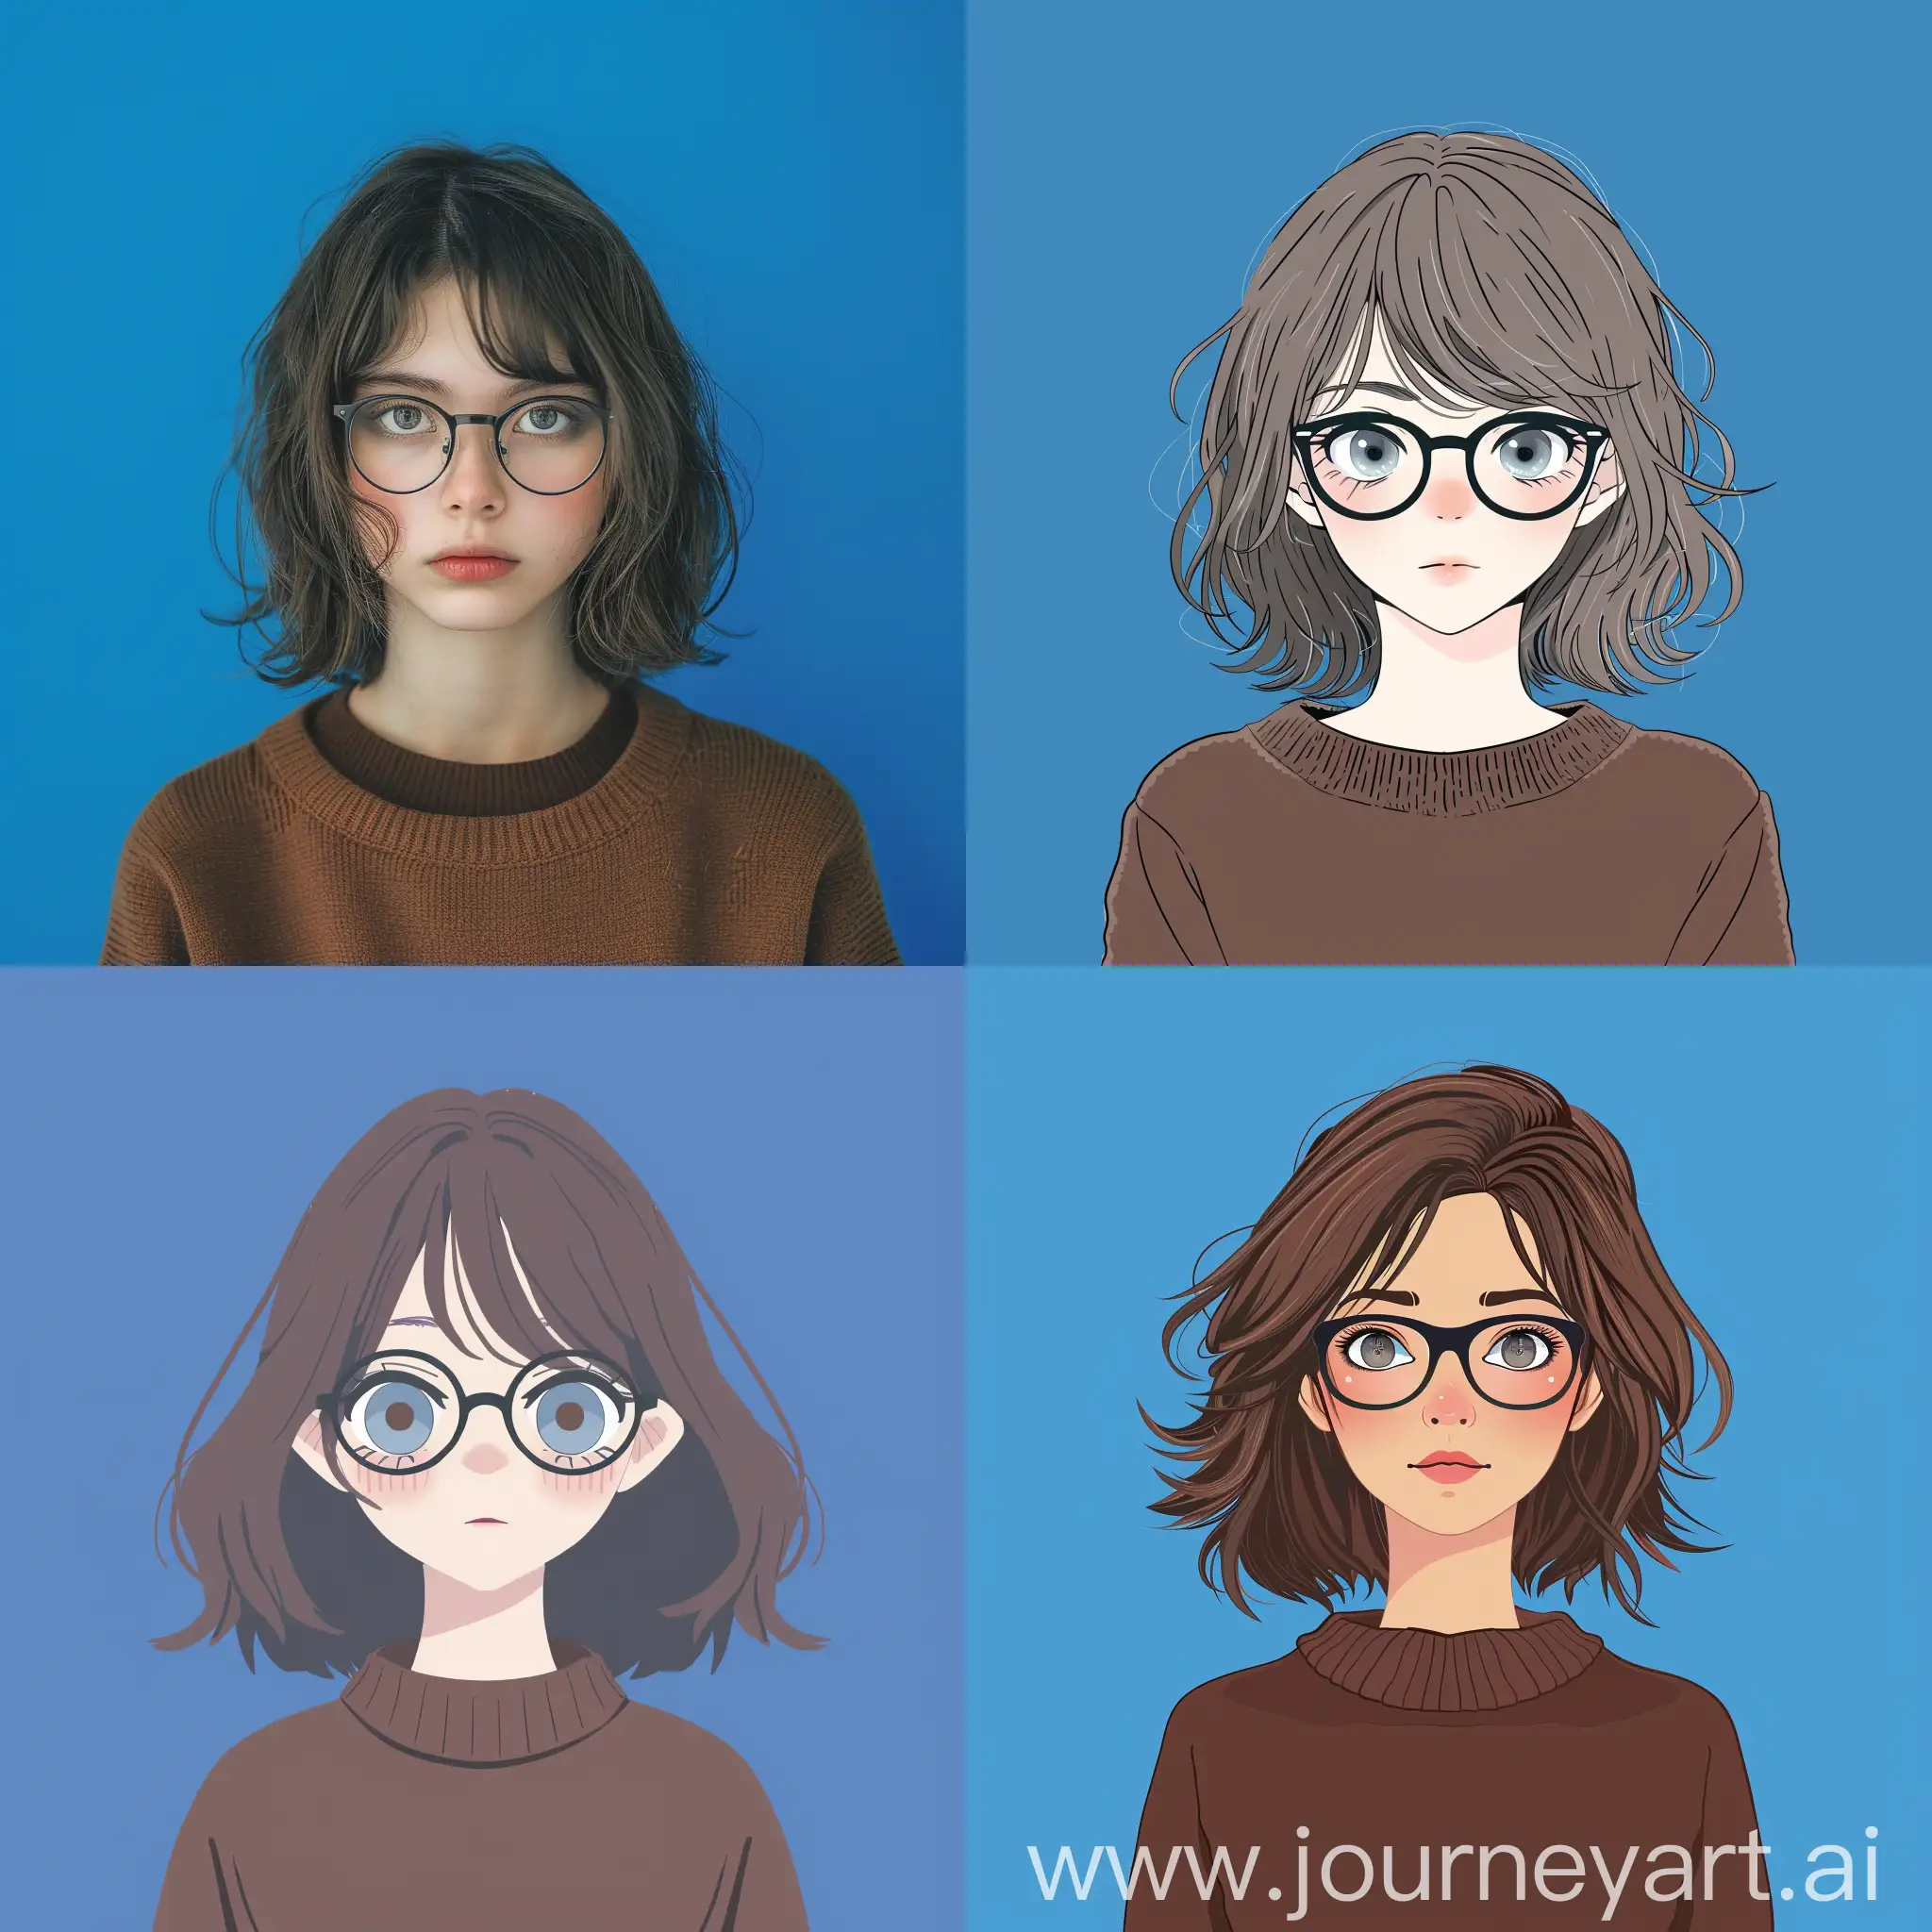 The image of a human up to her shoulders. Background=solid blue color. Gender=girl. Hair=brown, scruffy, shoulder-length. Eyes=relaxed, grey-blue  Face features=cute, neat eyebrows, even nose, slightly plump lips. Body type=a little lush. Clothes=brown sweater, black glasses.